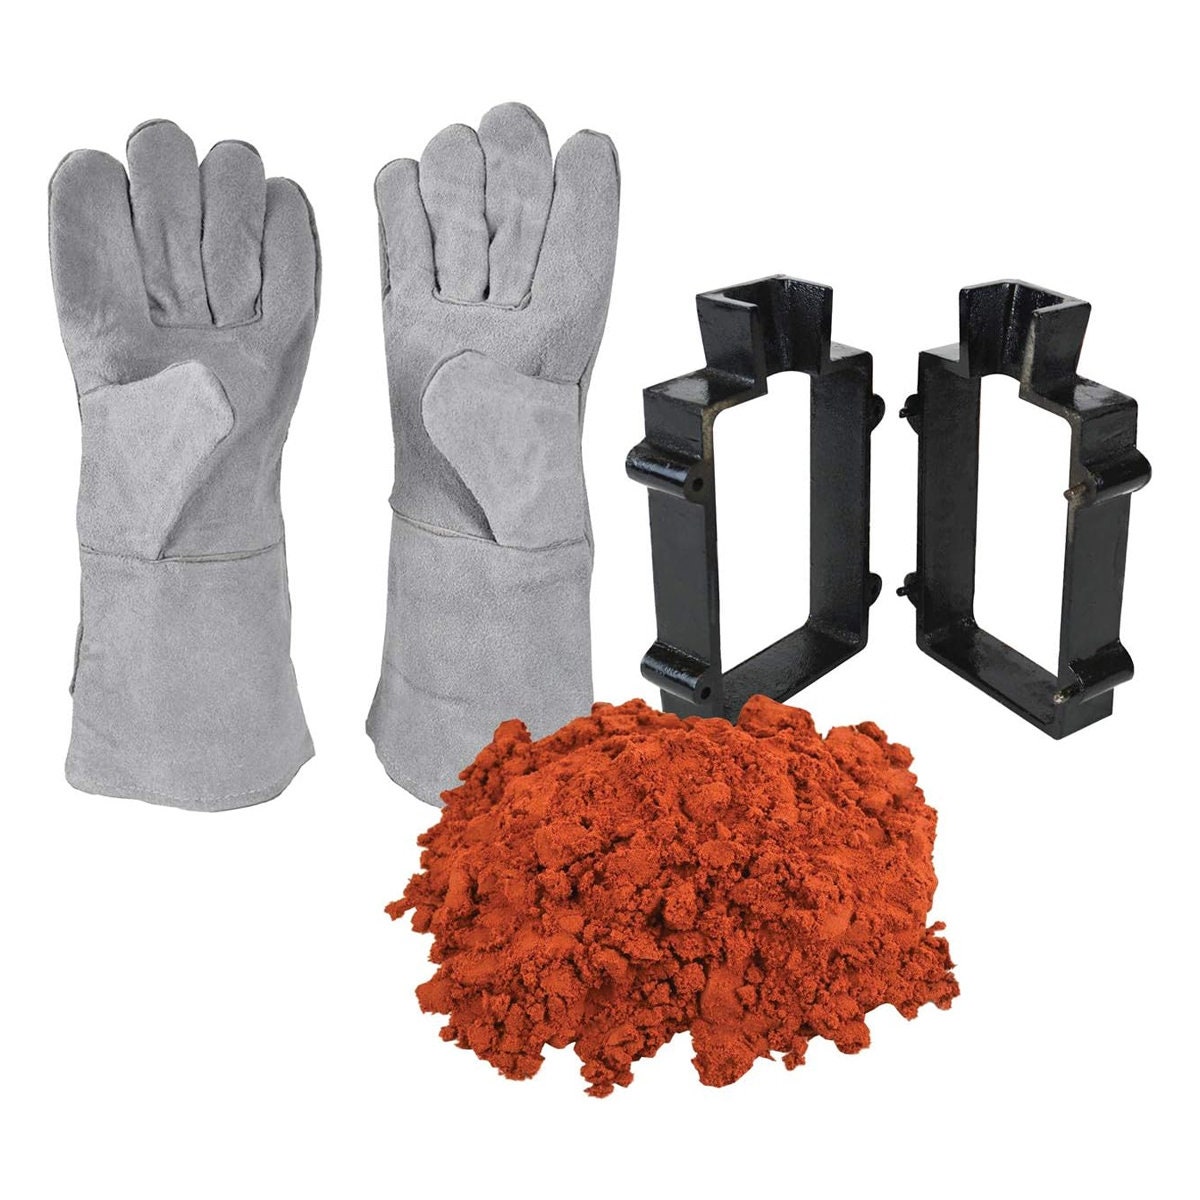 Sand Casting & Safety Gear Set With 5 Lbs of Petrobond Mold 